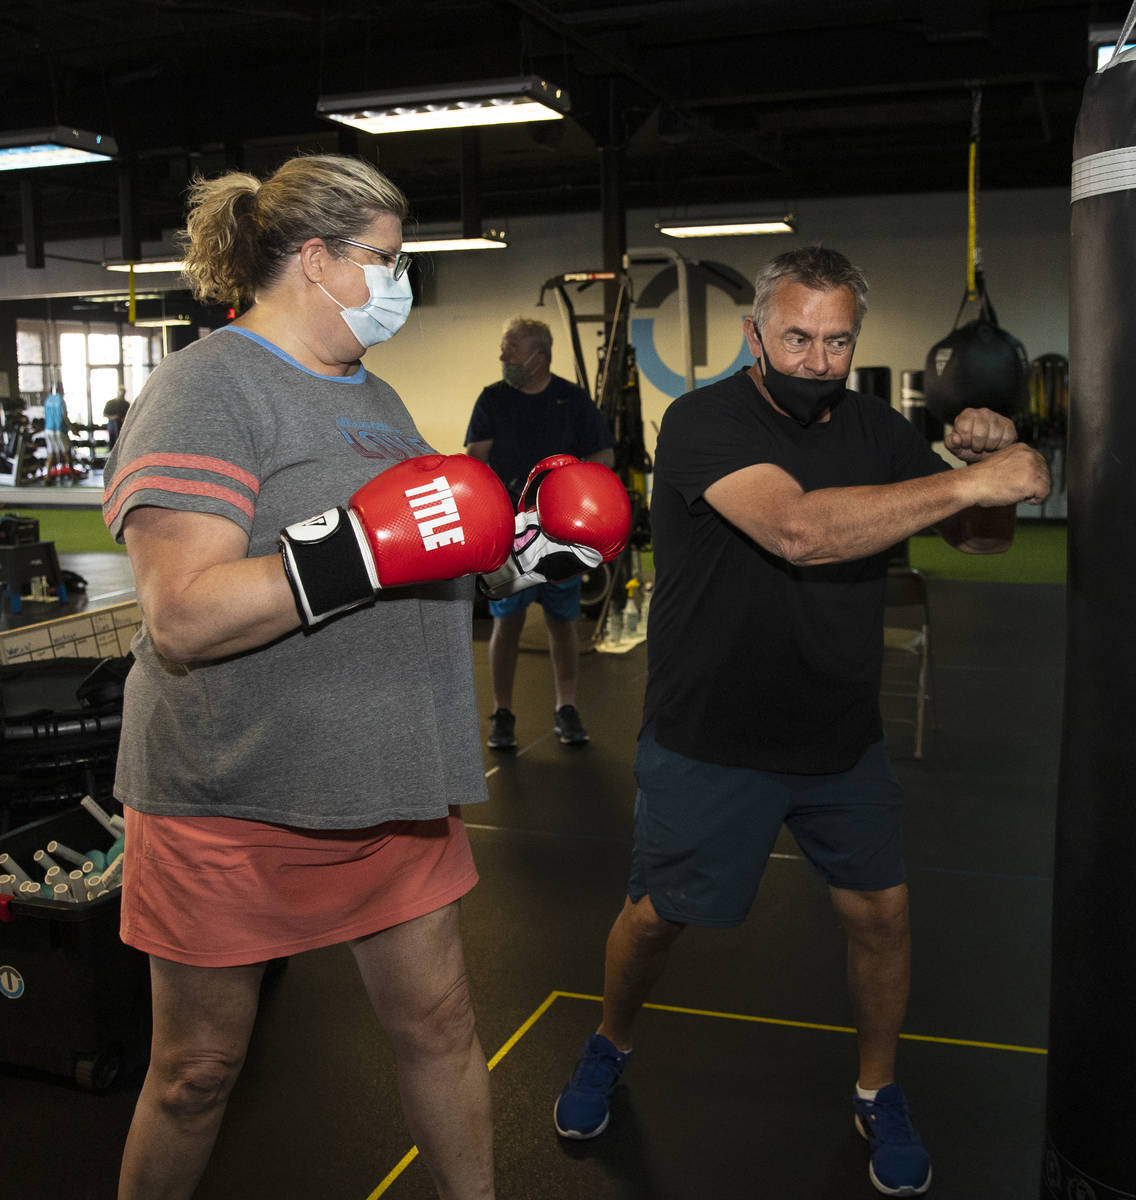 Robert Vlcek, a volunteer trainer, demonstrates to Gwen Vaughn, 48, how to punch the bag during ...